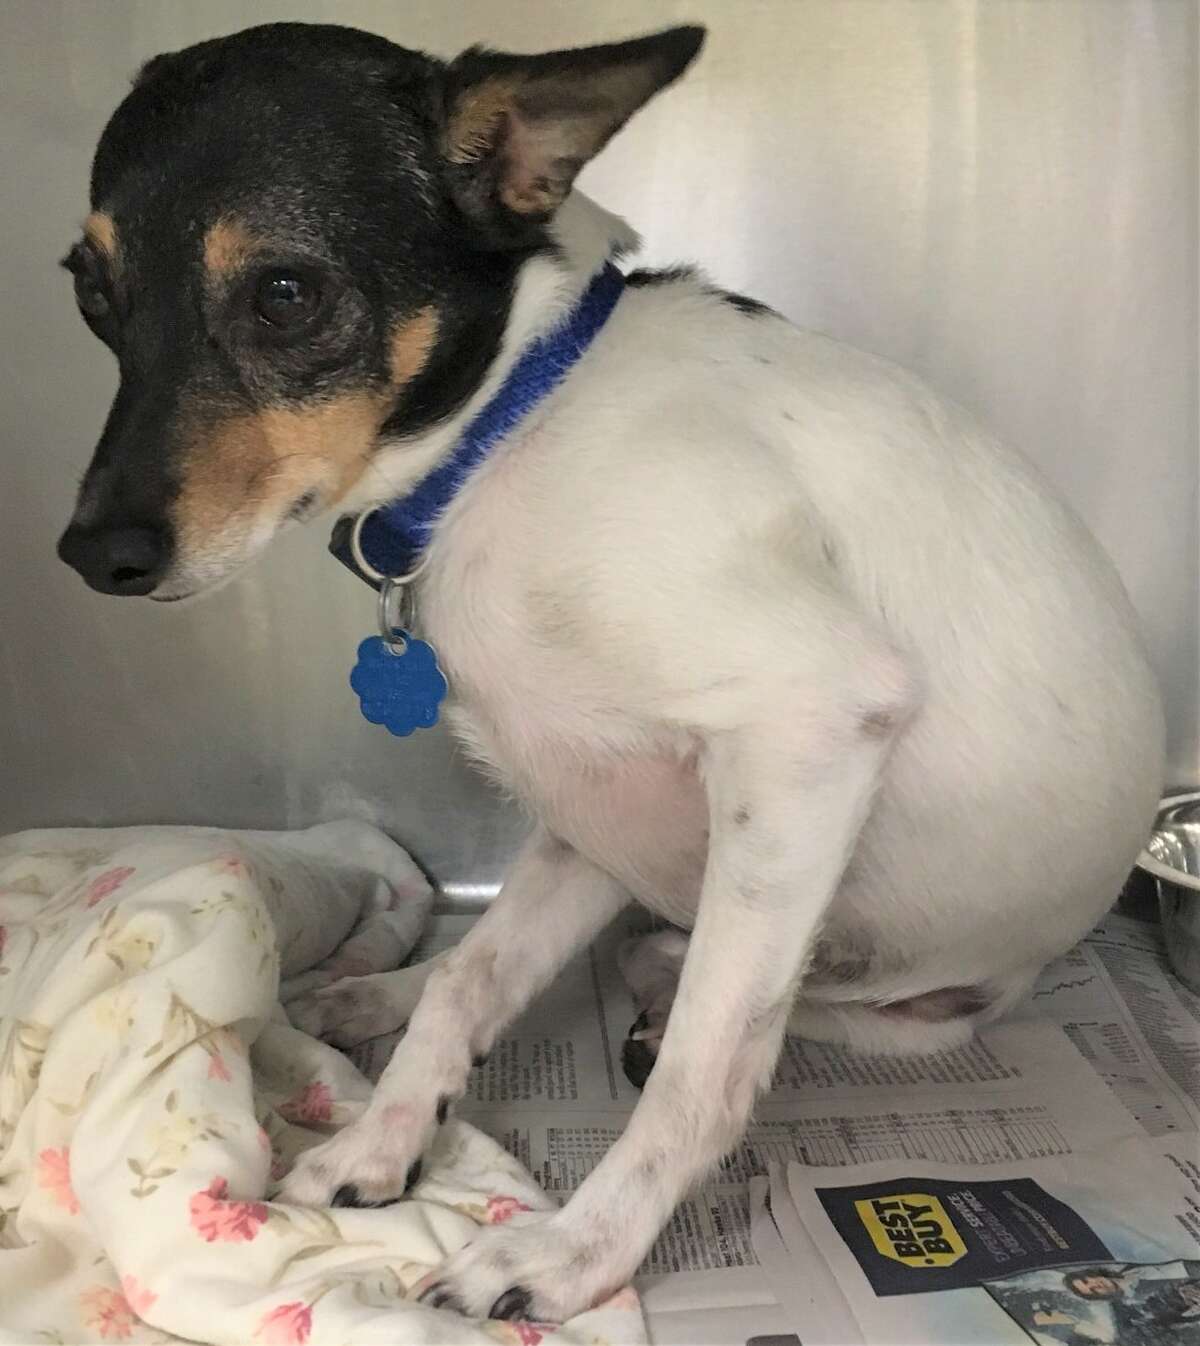 Ruby, a rat terrier, is still recovering in the ACS clinic after being thrown out of a second-story window.